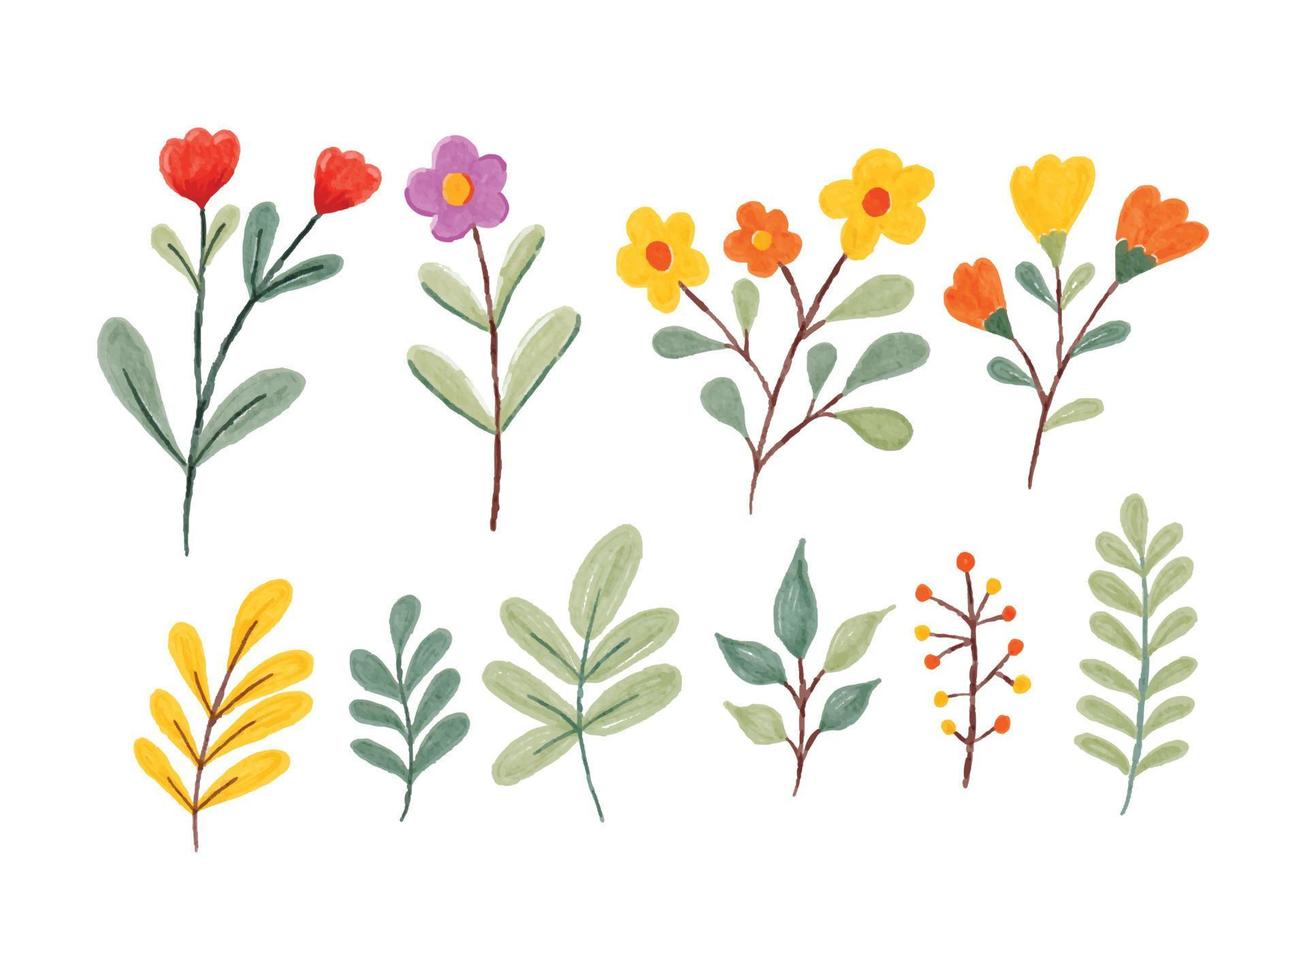 Wildflower and Leaf Watercolor Illustration vector